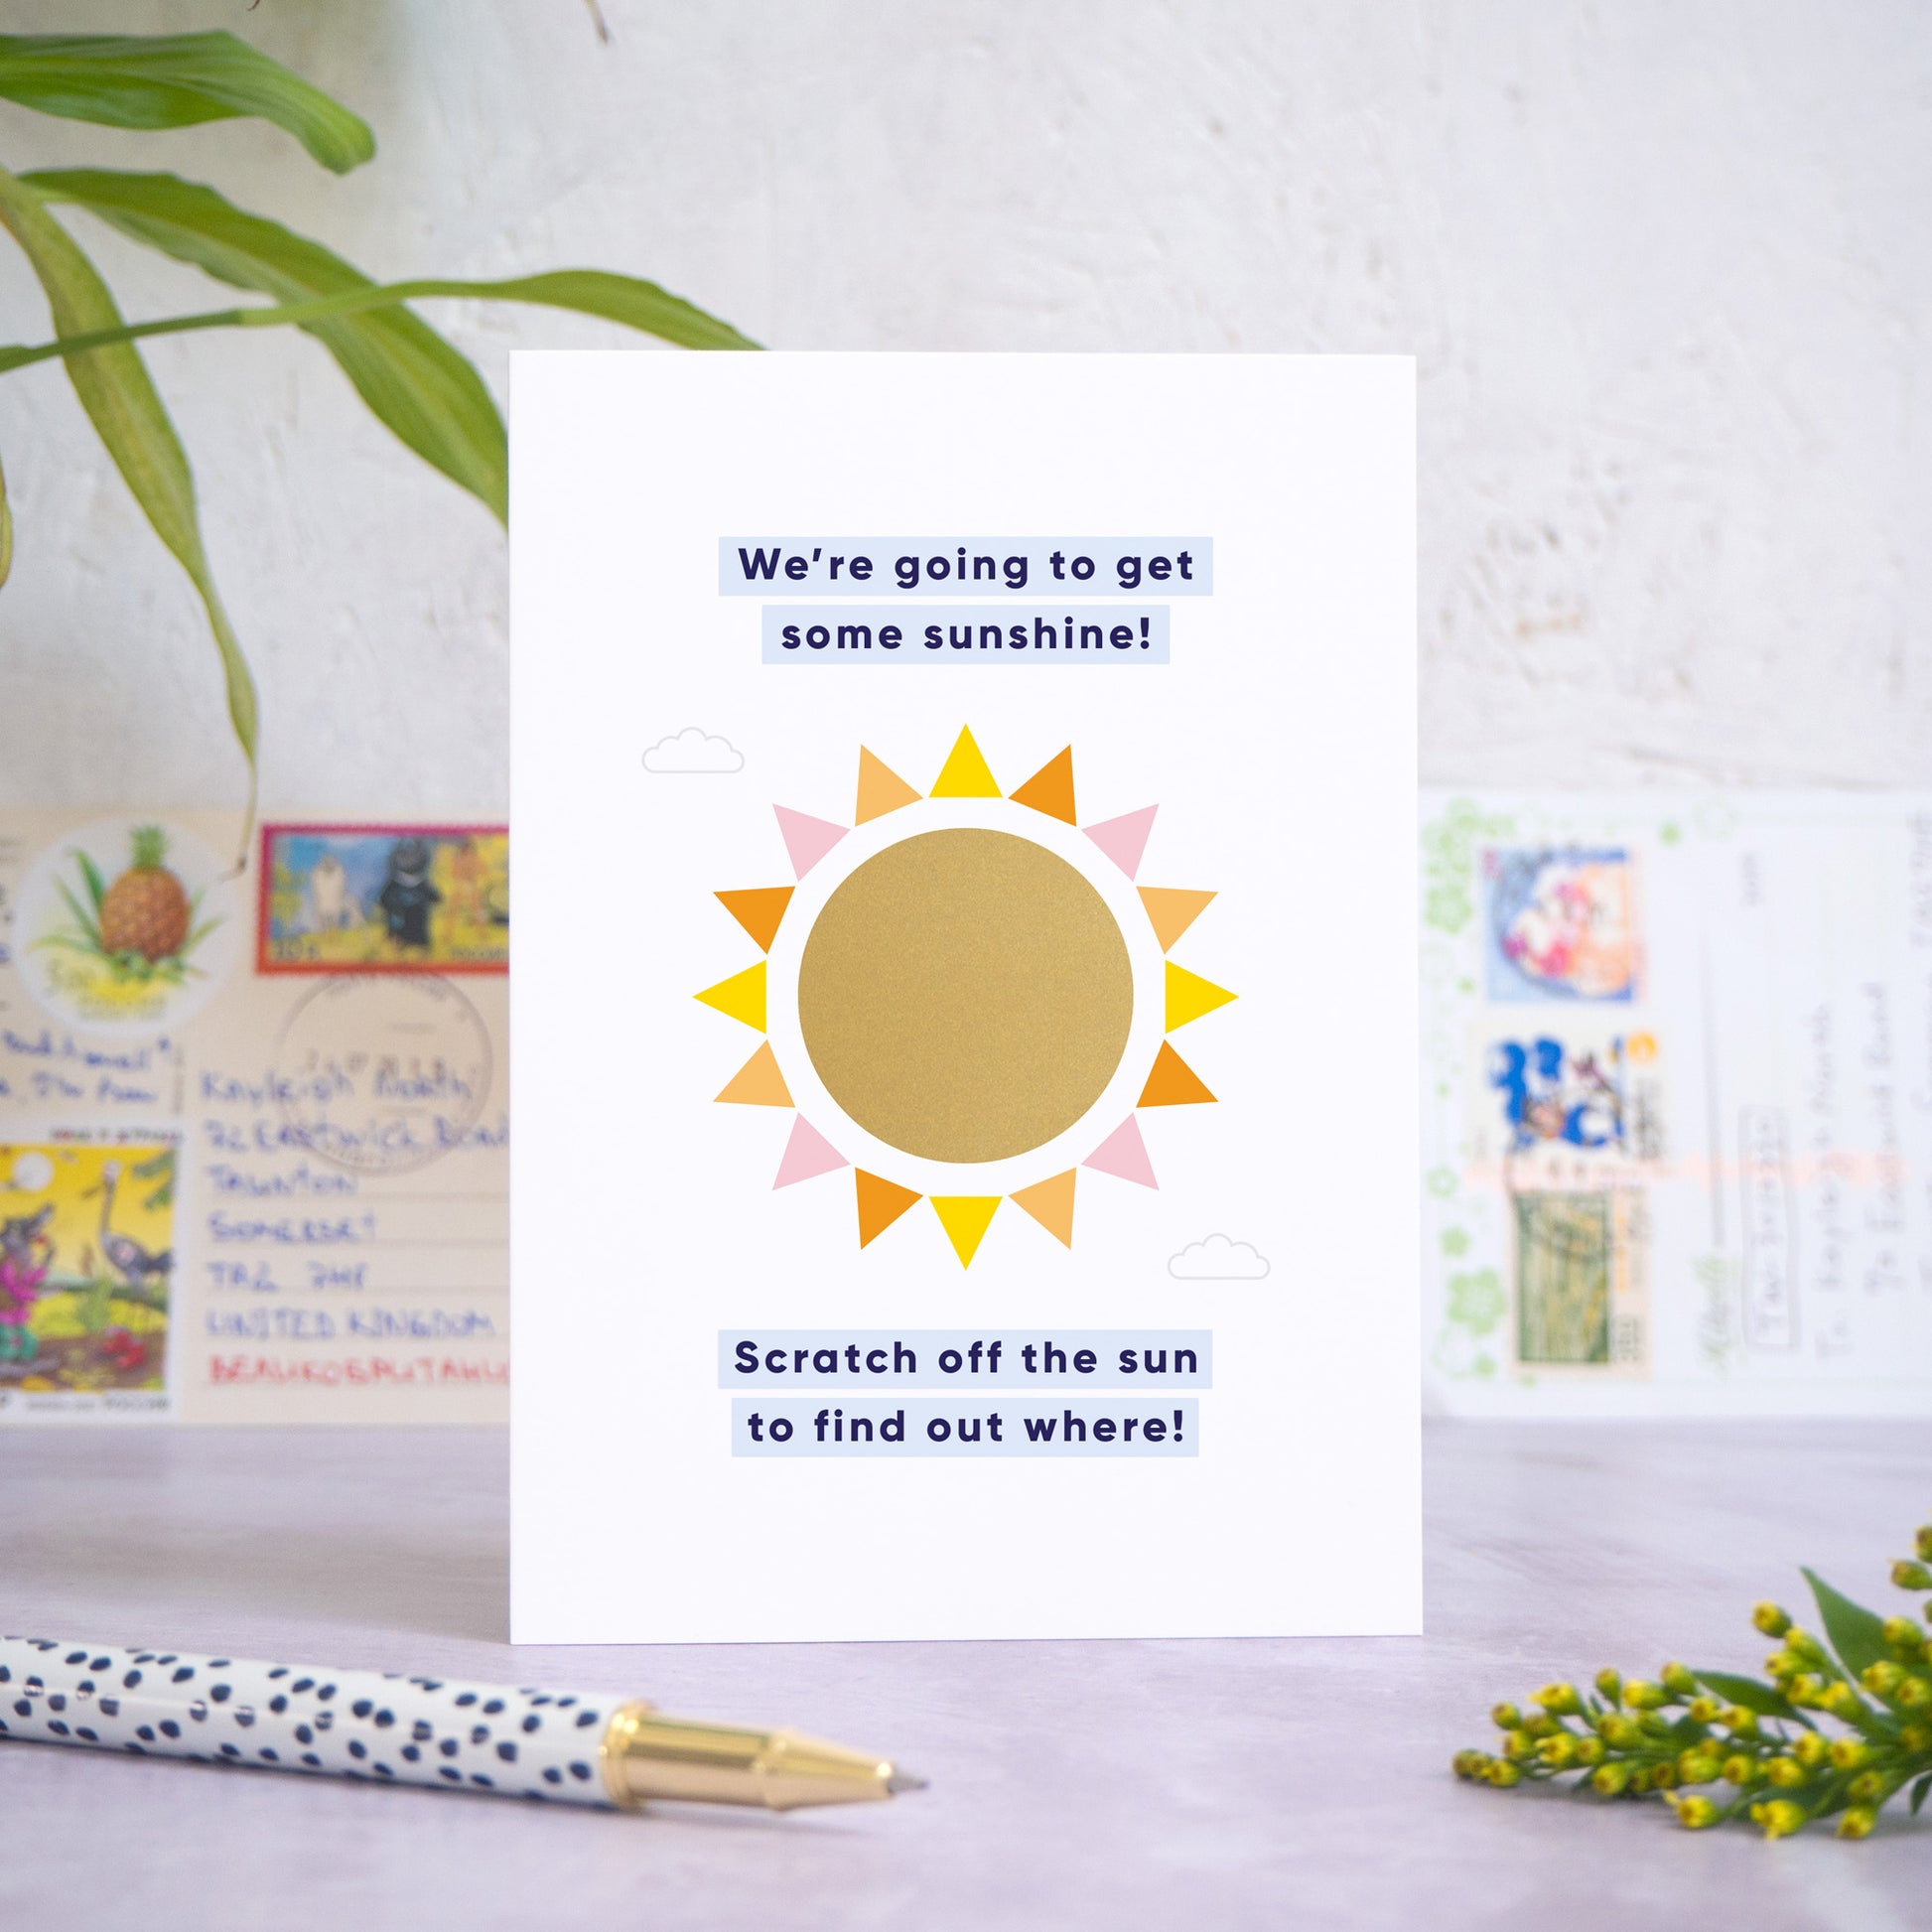 A holiday reveal scratch card featuring a shiny gold sun. The gold panel has not yet been scratched off to reveal the holiday destination. The text reads: “We're going to get some sunshine! Scratch off the sun to find out where!”. The card is standing on a grey surface with postcards in the background and a pen and foliage in the foreground.